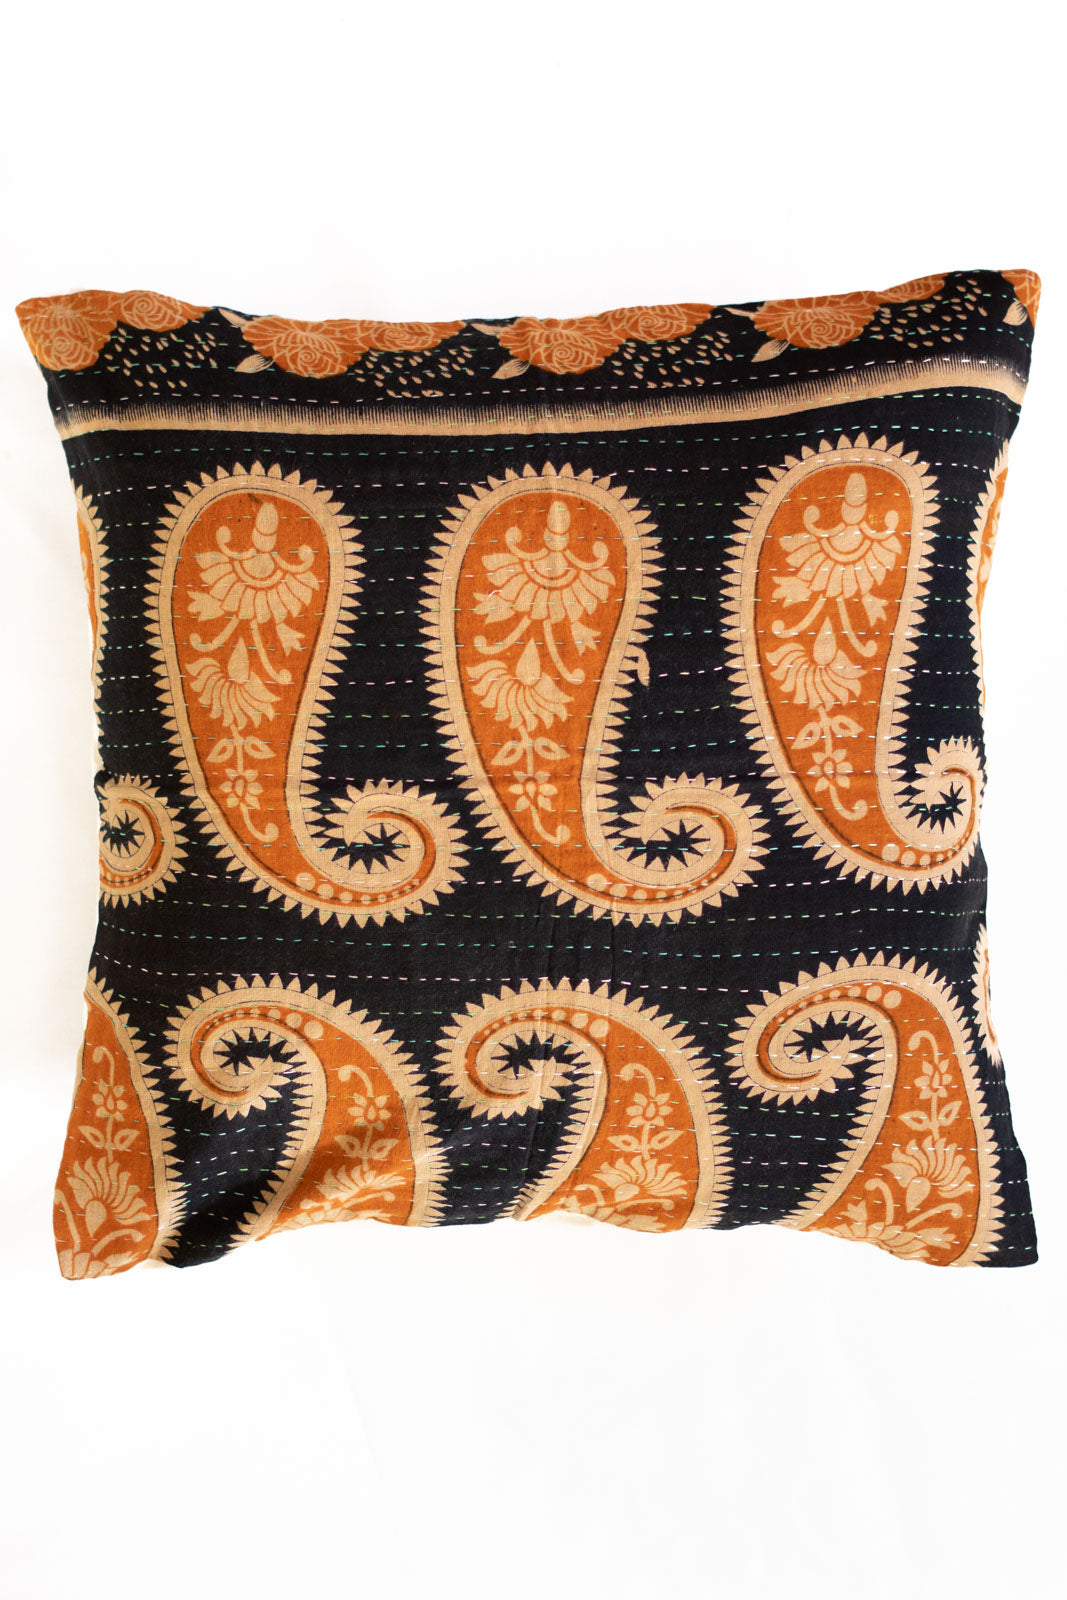 Marvelous no. 5 Kantha Pillow Cover